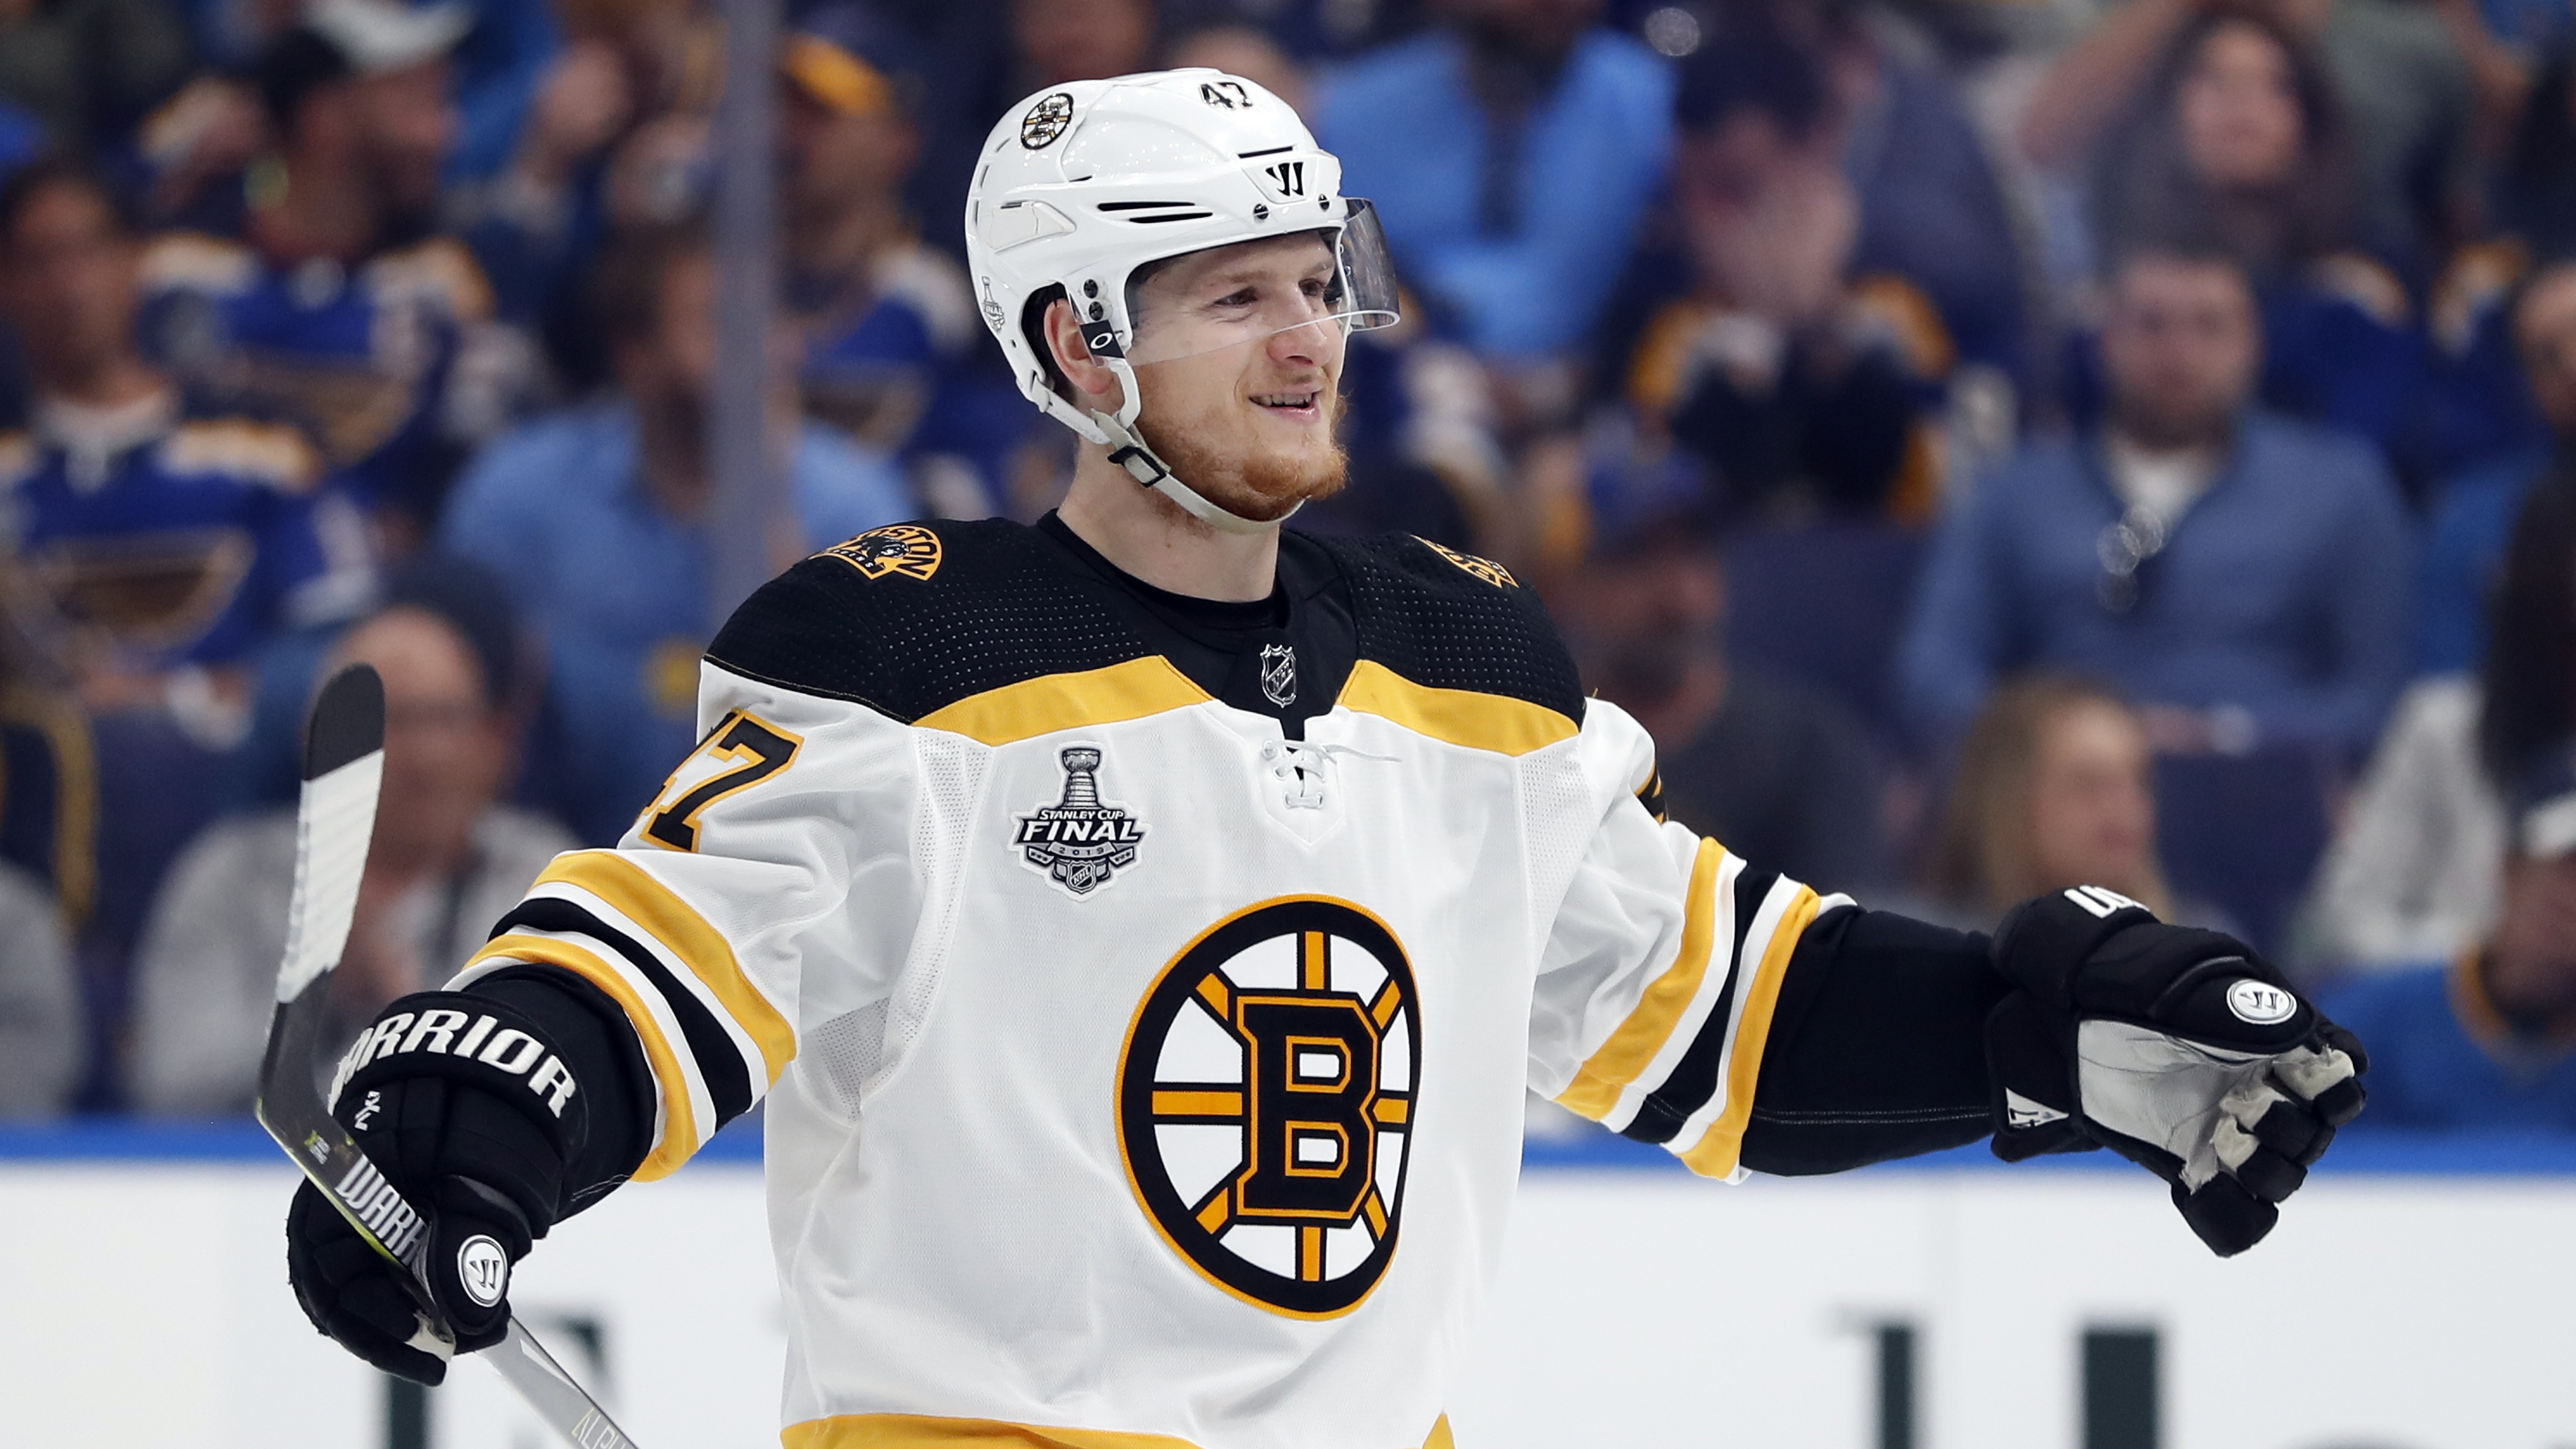 Poetry on ice: Bruins’ potent power play is key to Cup Final